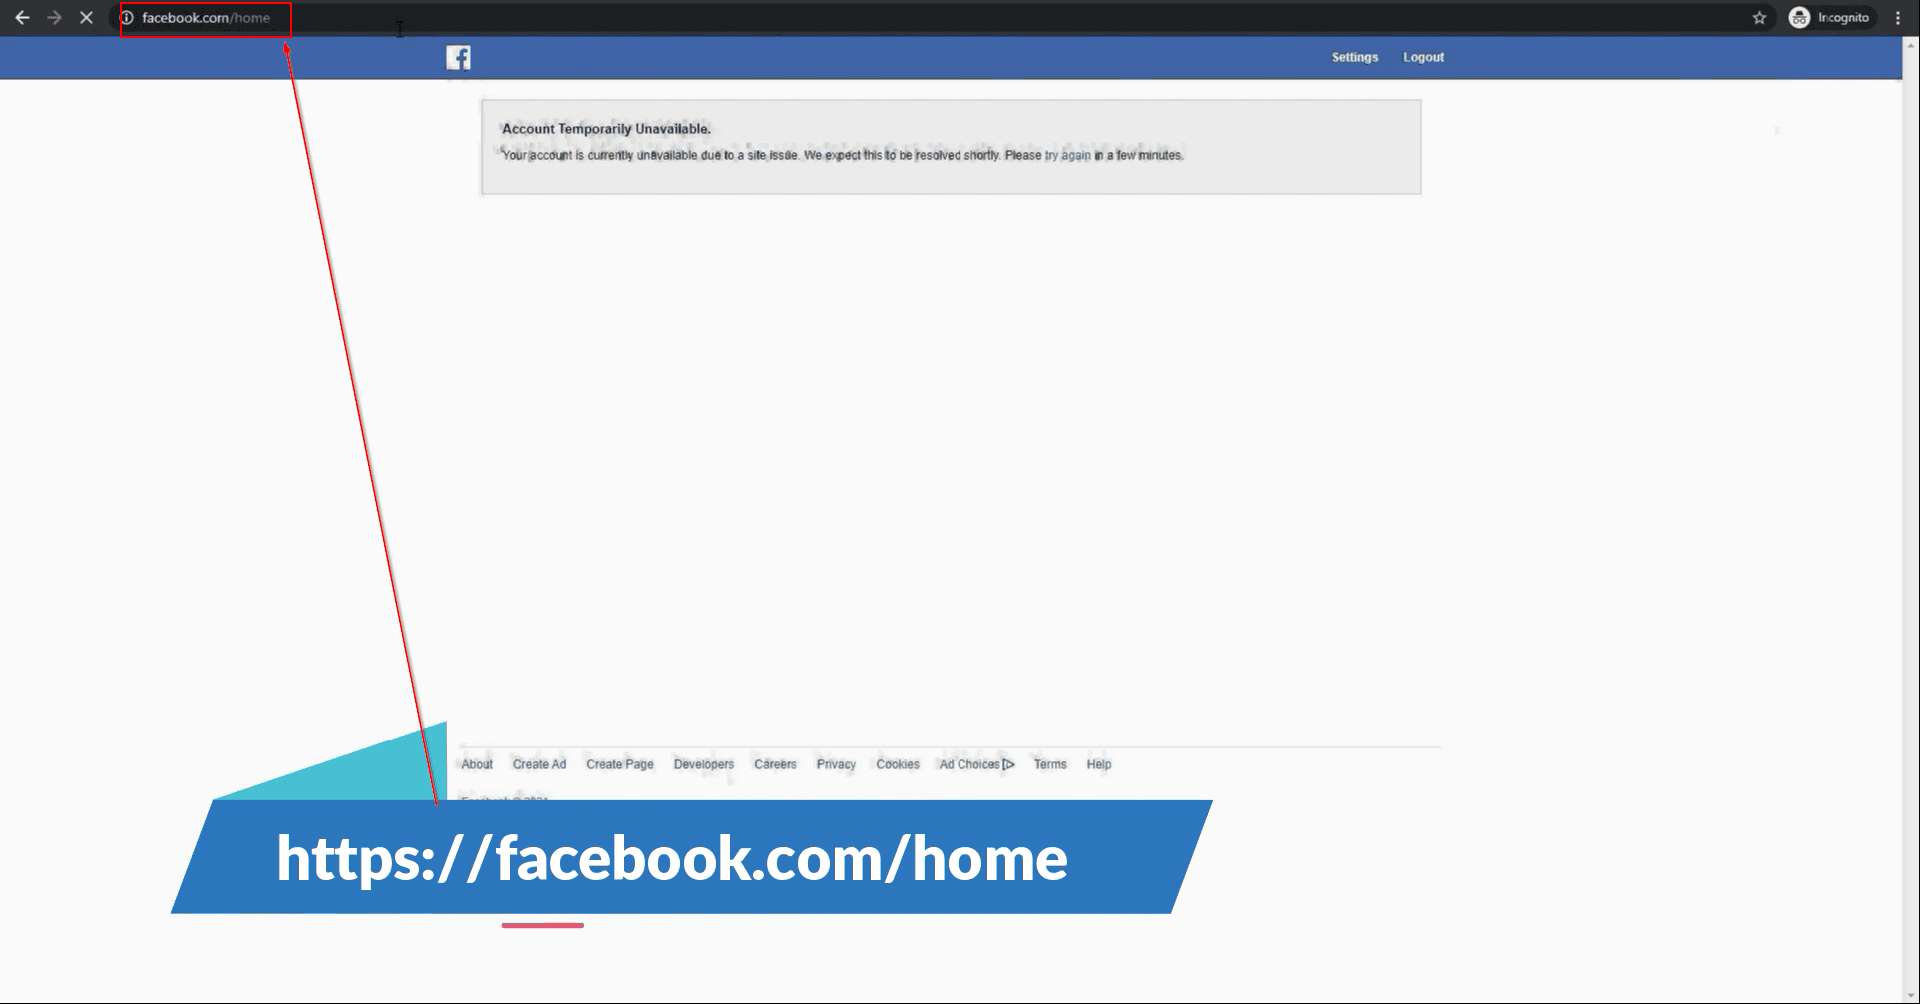 Feature Unavailable: Facebook Login is currently unavailable for